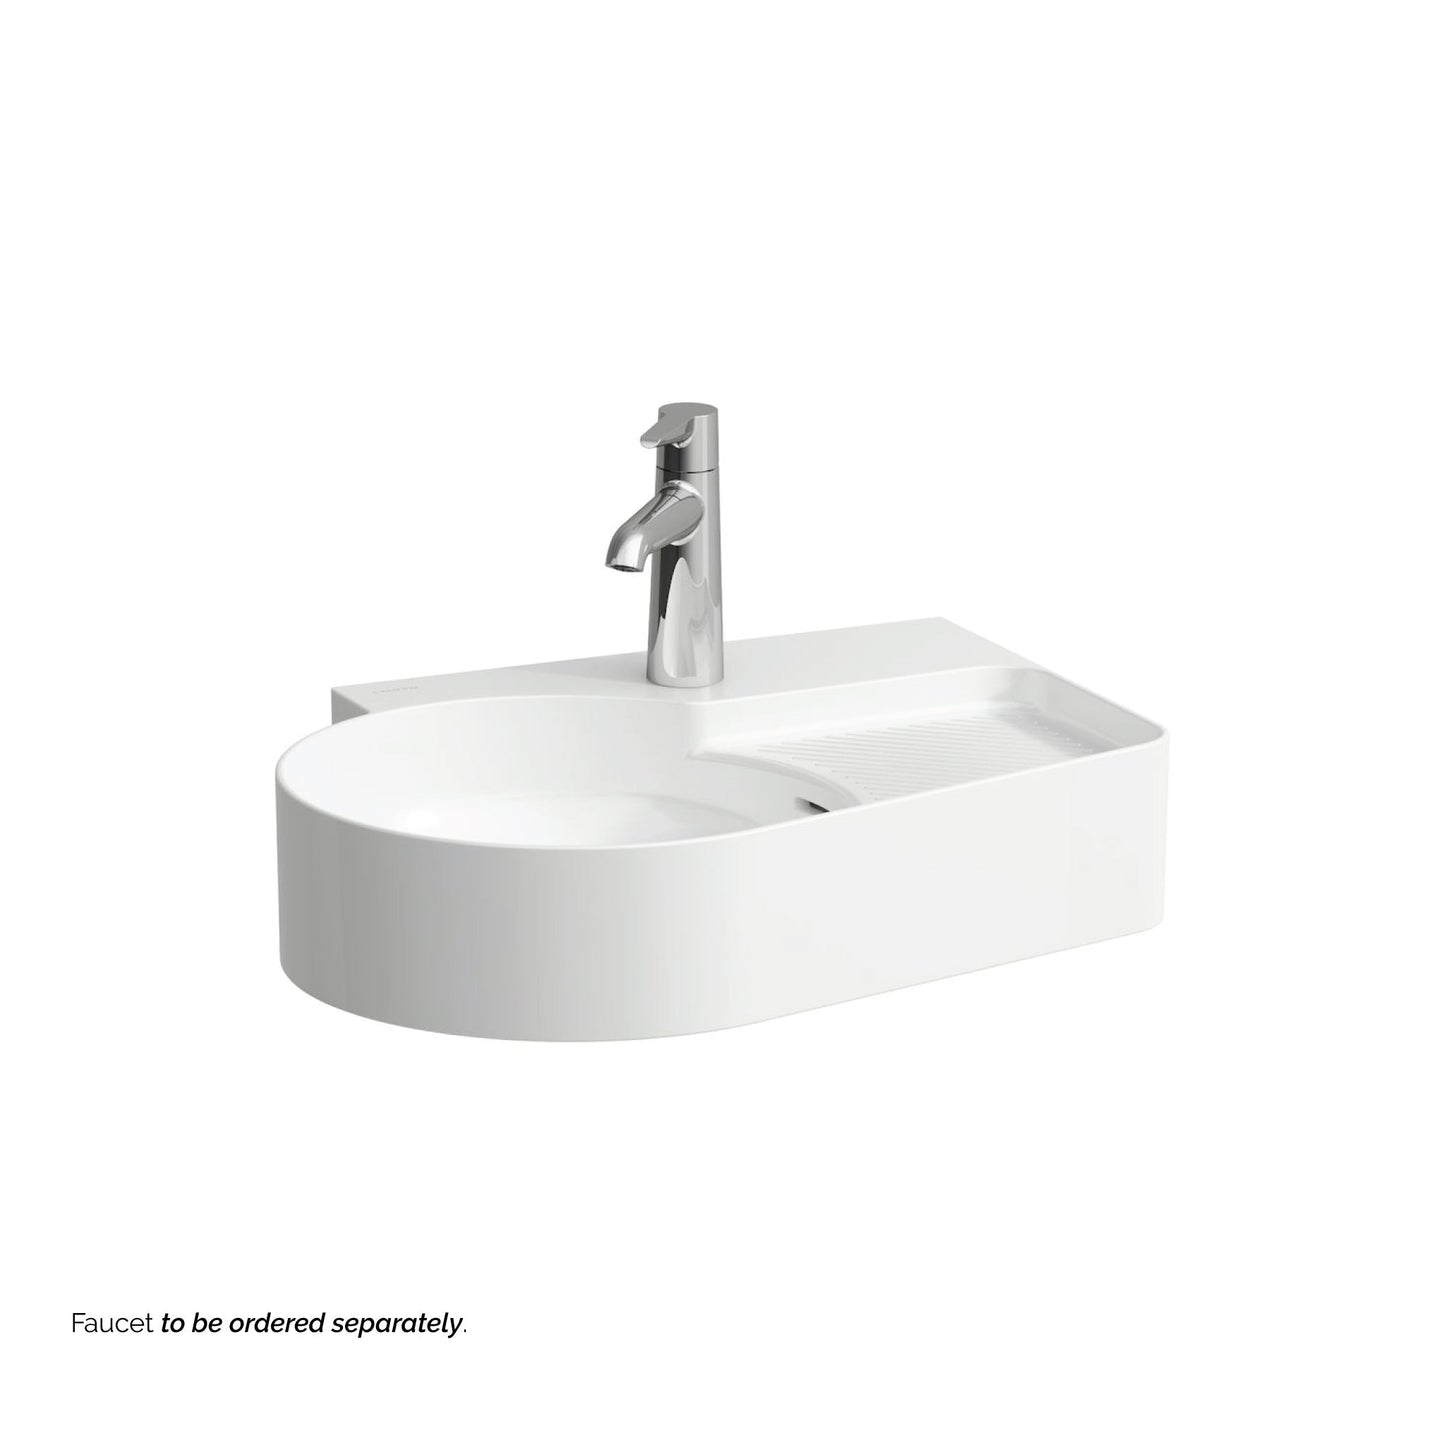 Laufen Val 21" x 16" White Countertop Bathroom Sink With Faucet Hole on the Right